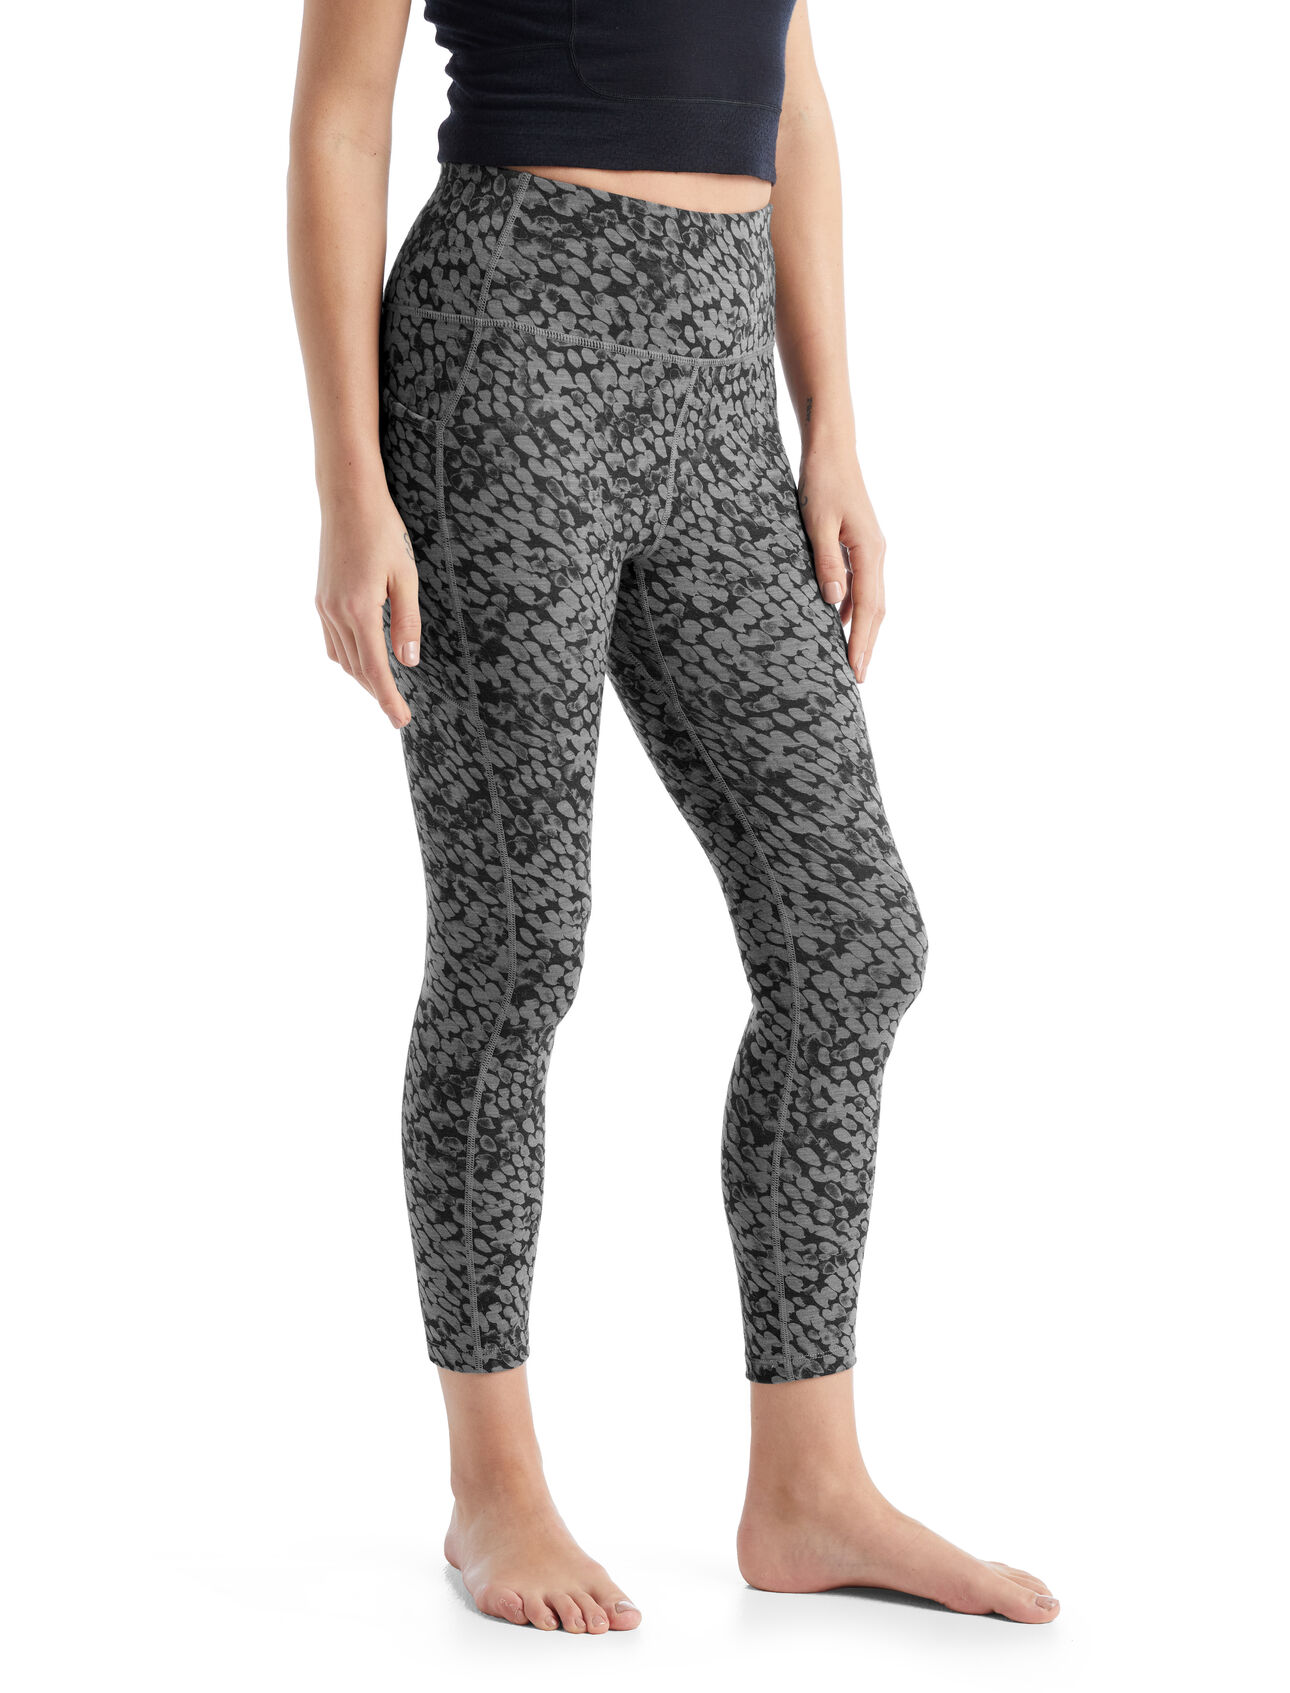 Womens Merino Fastray High Rise Tights Forest Shadows Functional, form-fitting bottoms for active performance on or off the trail, the Fastray High Rise Tights Forest Shadows feature a stretchy merino wool blend with a high waist for added coverage.